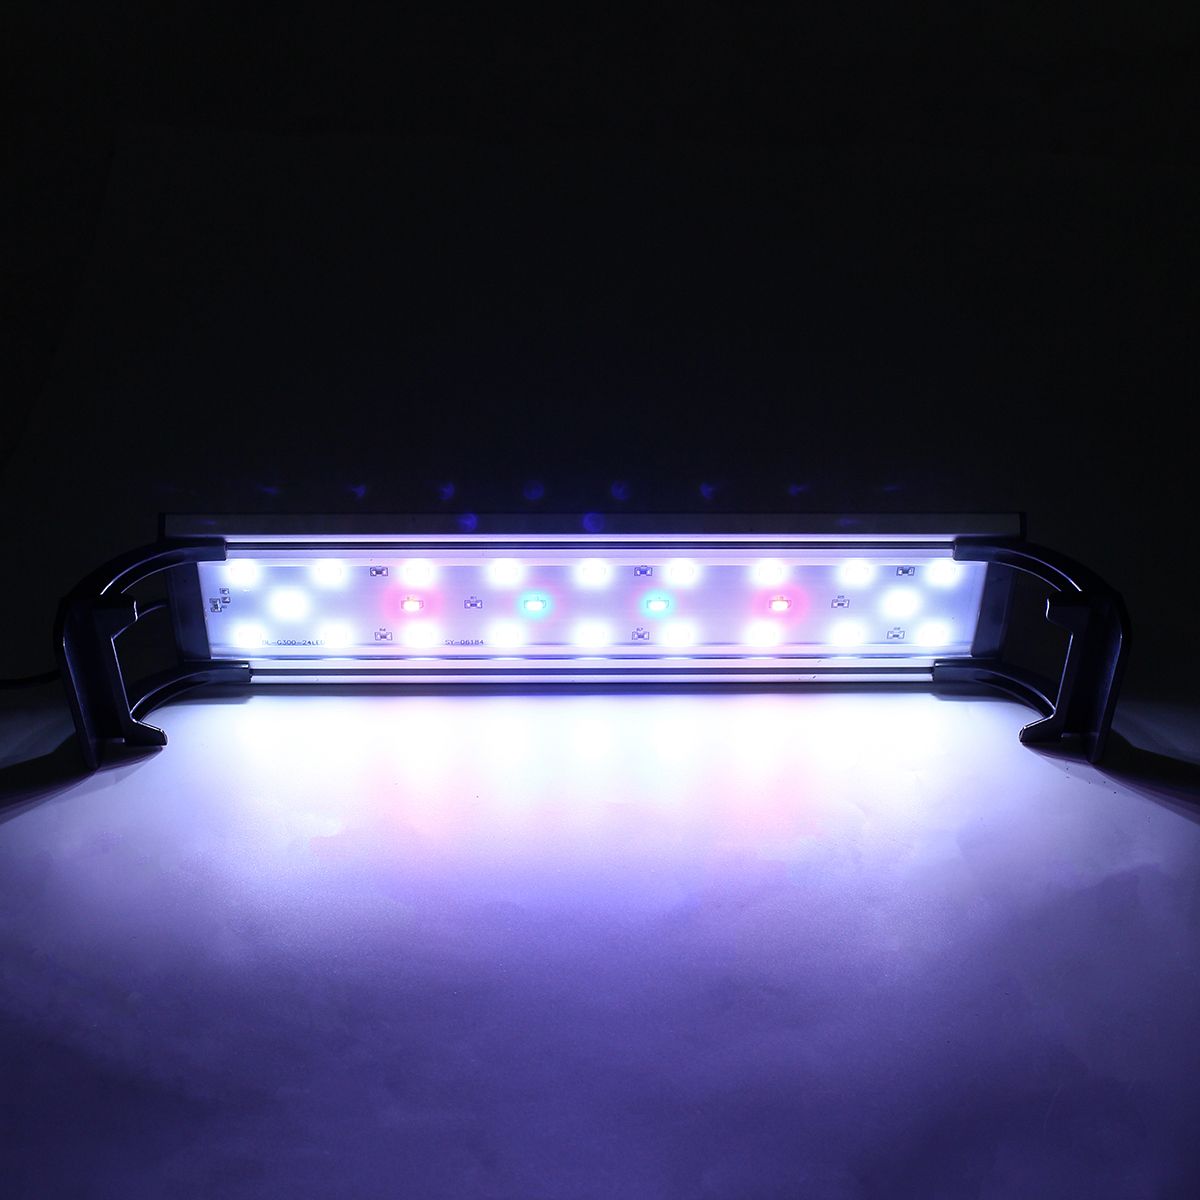 Dimmable--Timer-LED-Fish-Tank-Light-Lamp-Hood-Aquarium-Lighting-with-Extendable-Brackets-for-30CM-Ta-1639937